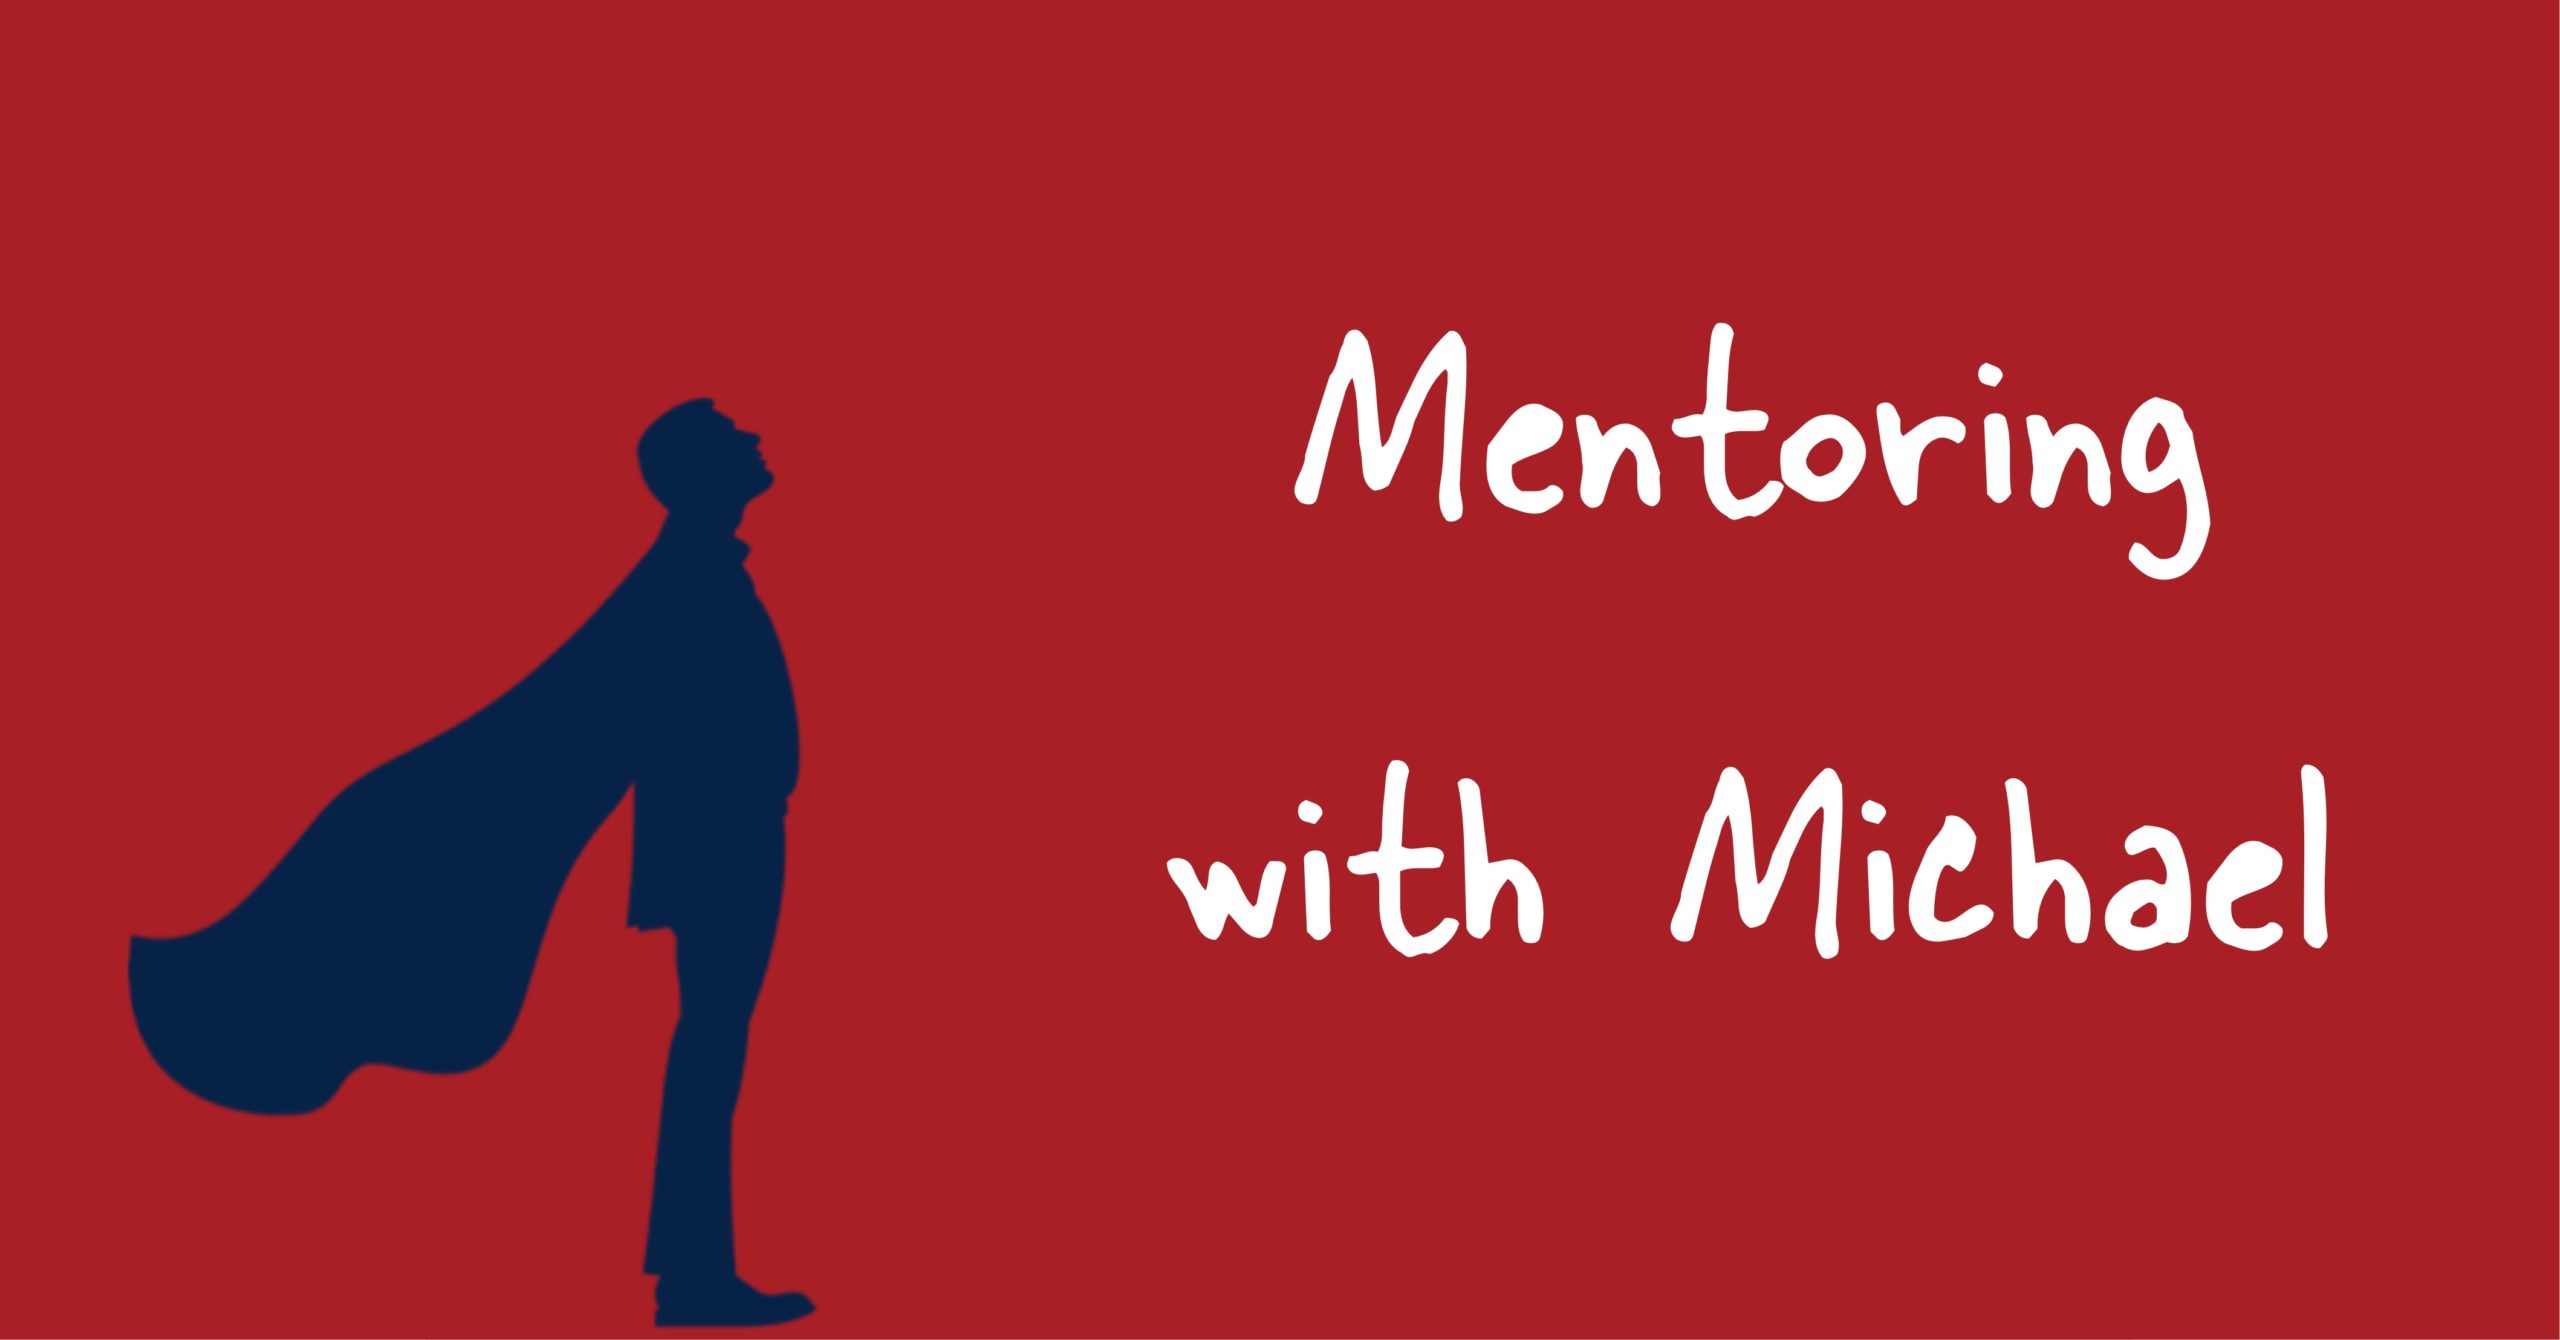 Mentoring with Michael